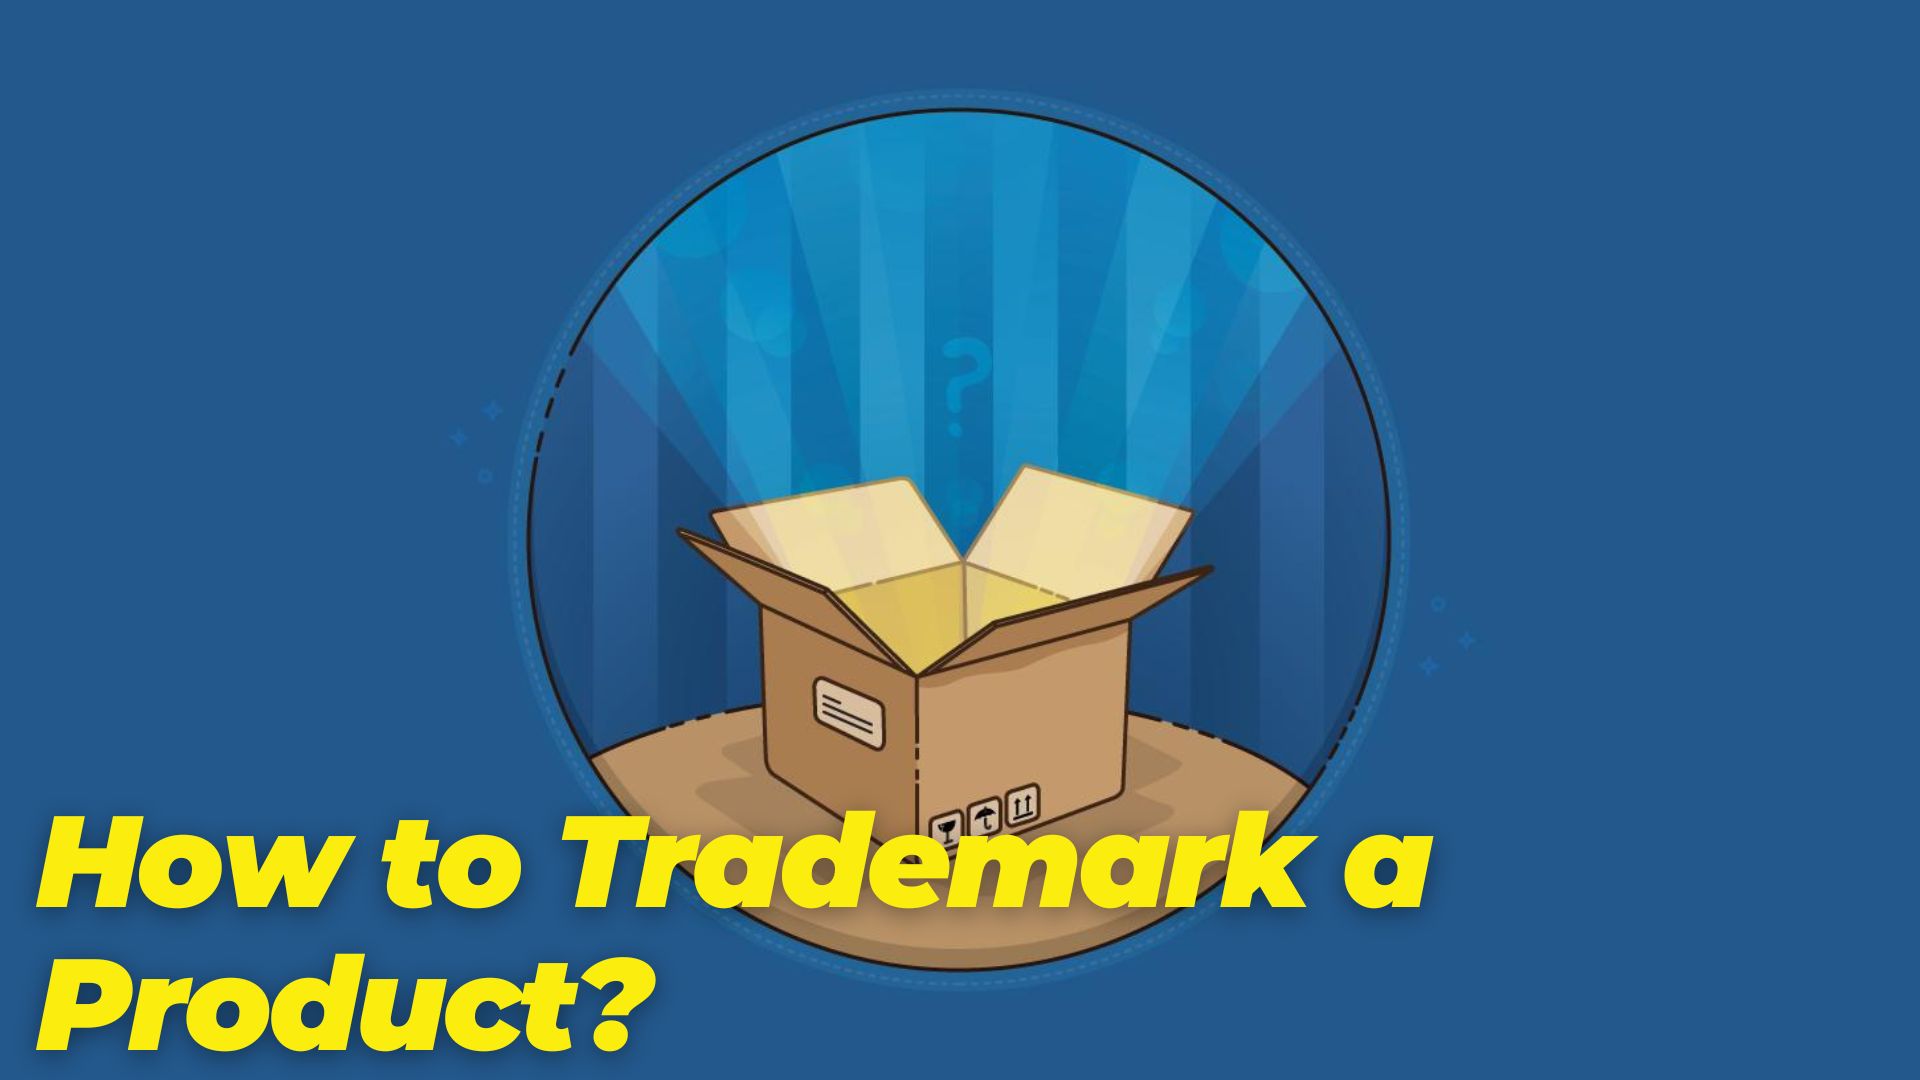 How to Trademark a Product?